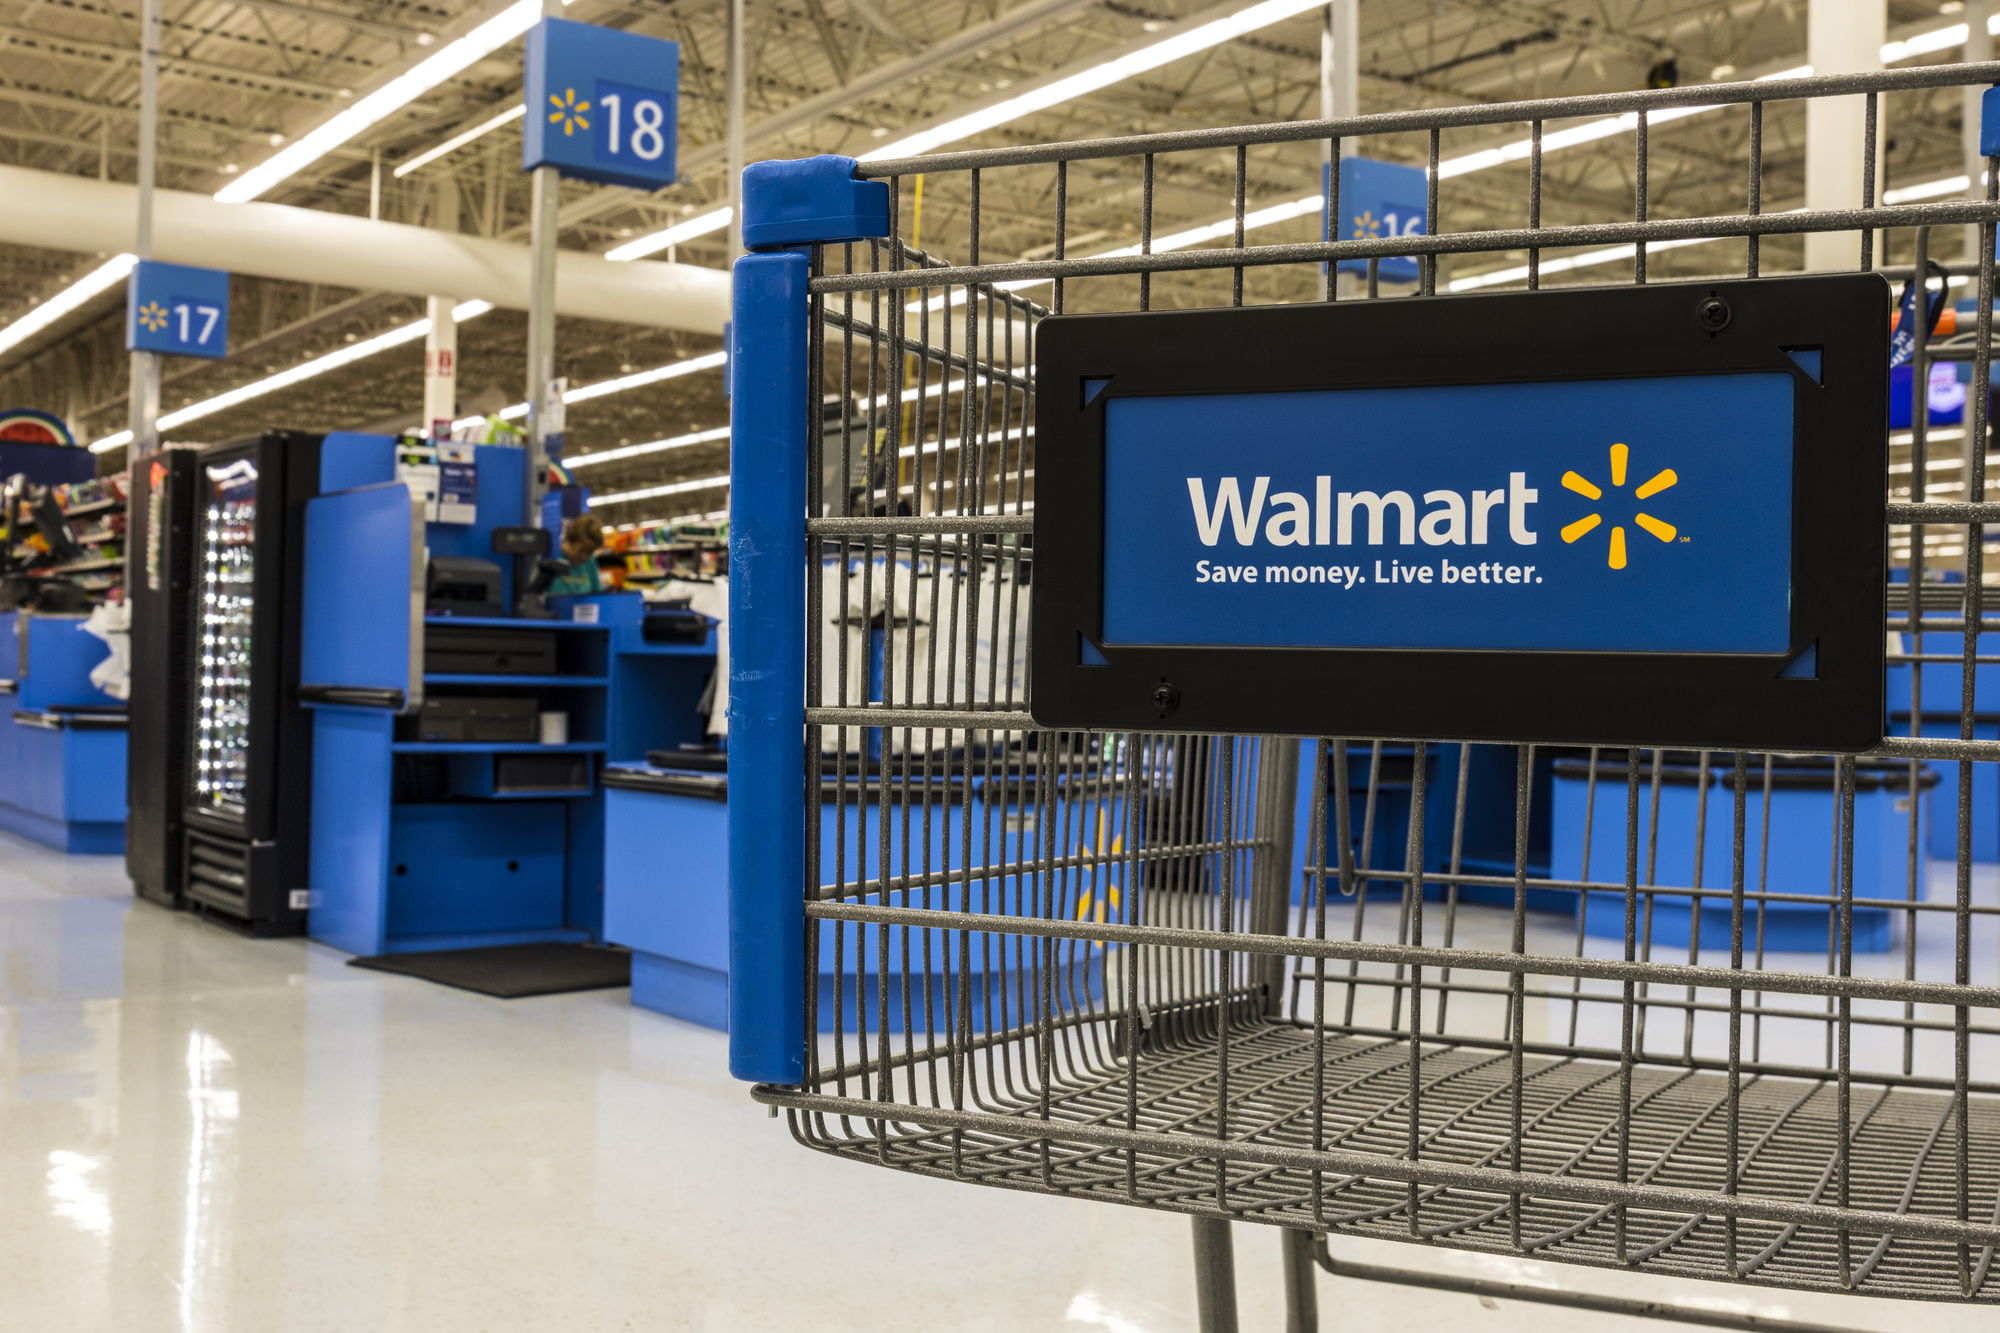 Walmart: A shopping cart, The company offering an assortment of merchandise and services at everyday low prices. 2000x1340 HD Wallpaper.